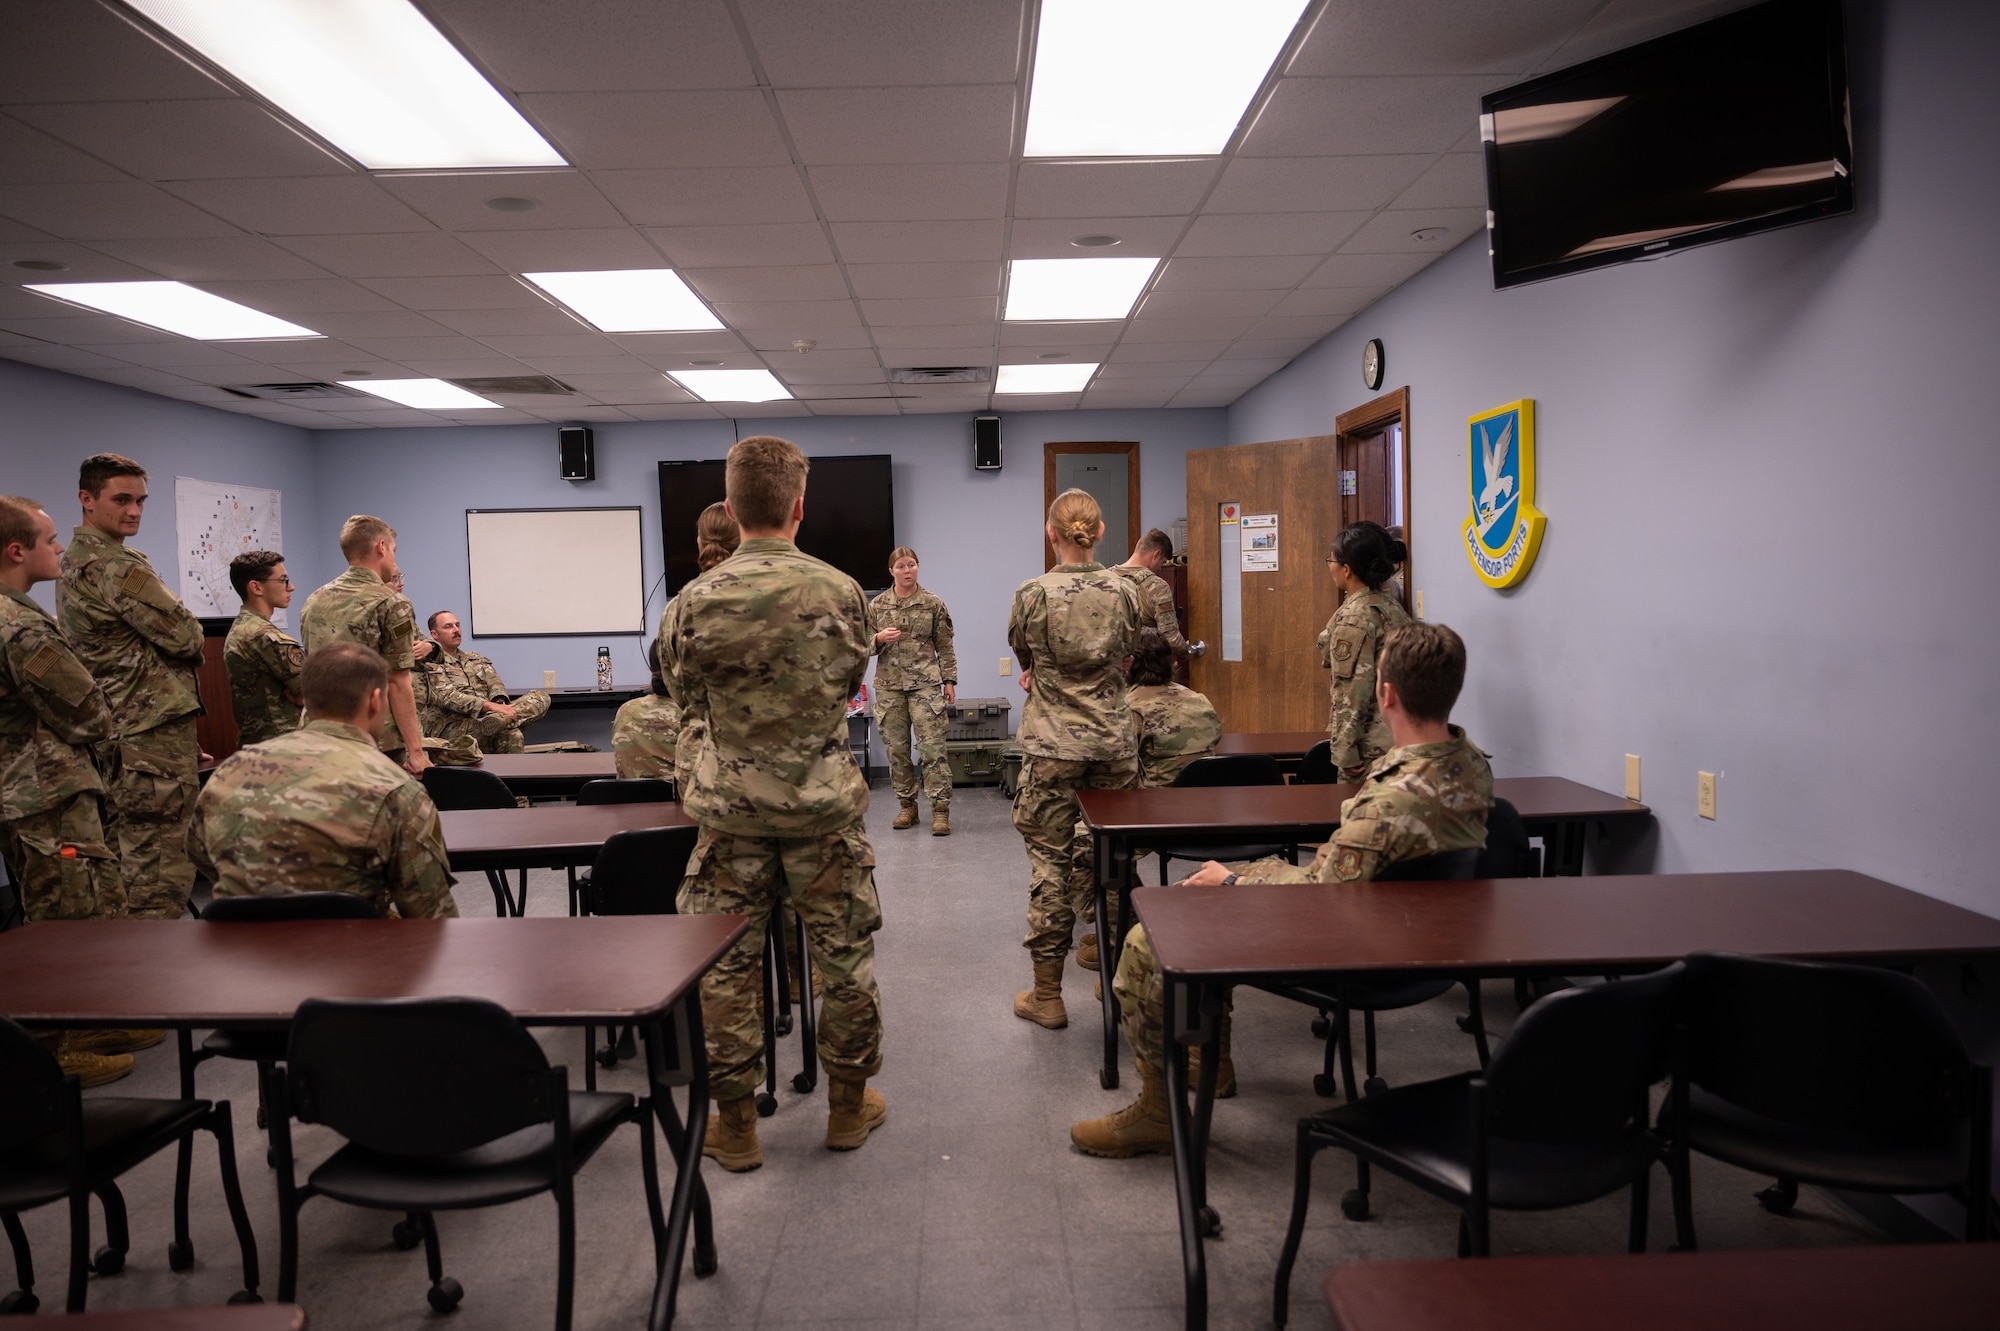 Members of the 4th Security Forces Squadron explain their unit’s daily operations to Air Force Reserve Officers’ Training Corps cadets during a tour at Seymour Johnson Air Force Base, North Carolina, August 3, 2023. ROTC develops the future leaders by preparing cadets to become officers while earning a college degree. (U.S. Air Force photo by Airman 1st Class Rebecca Sirimarco-Lang)